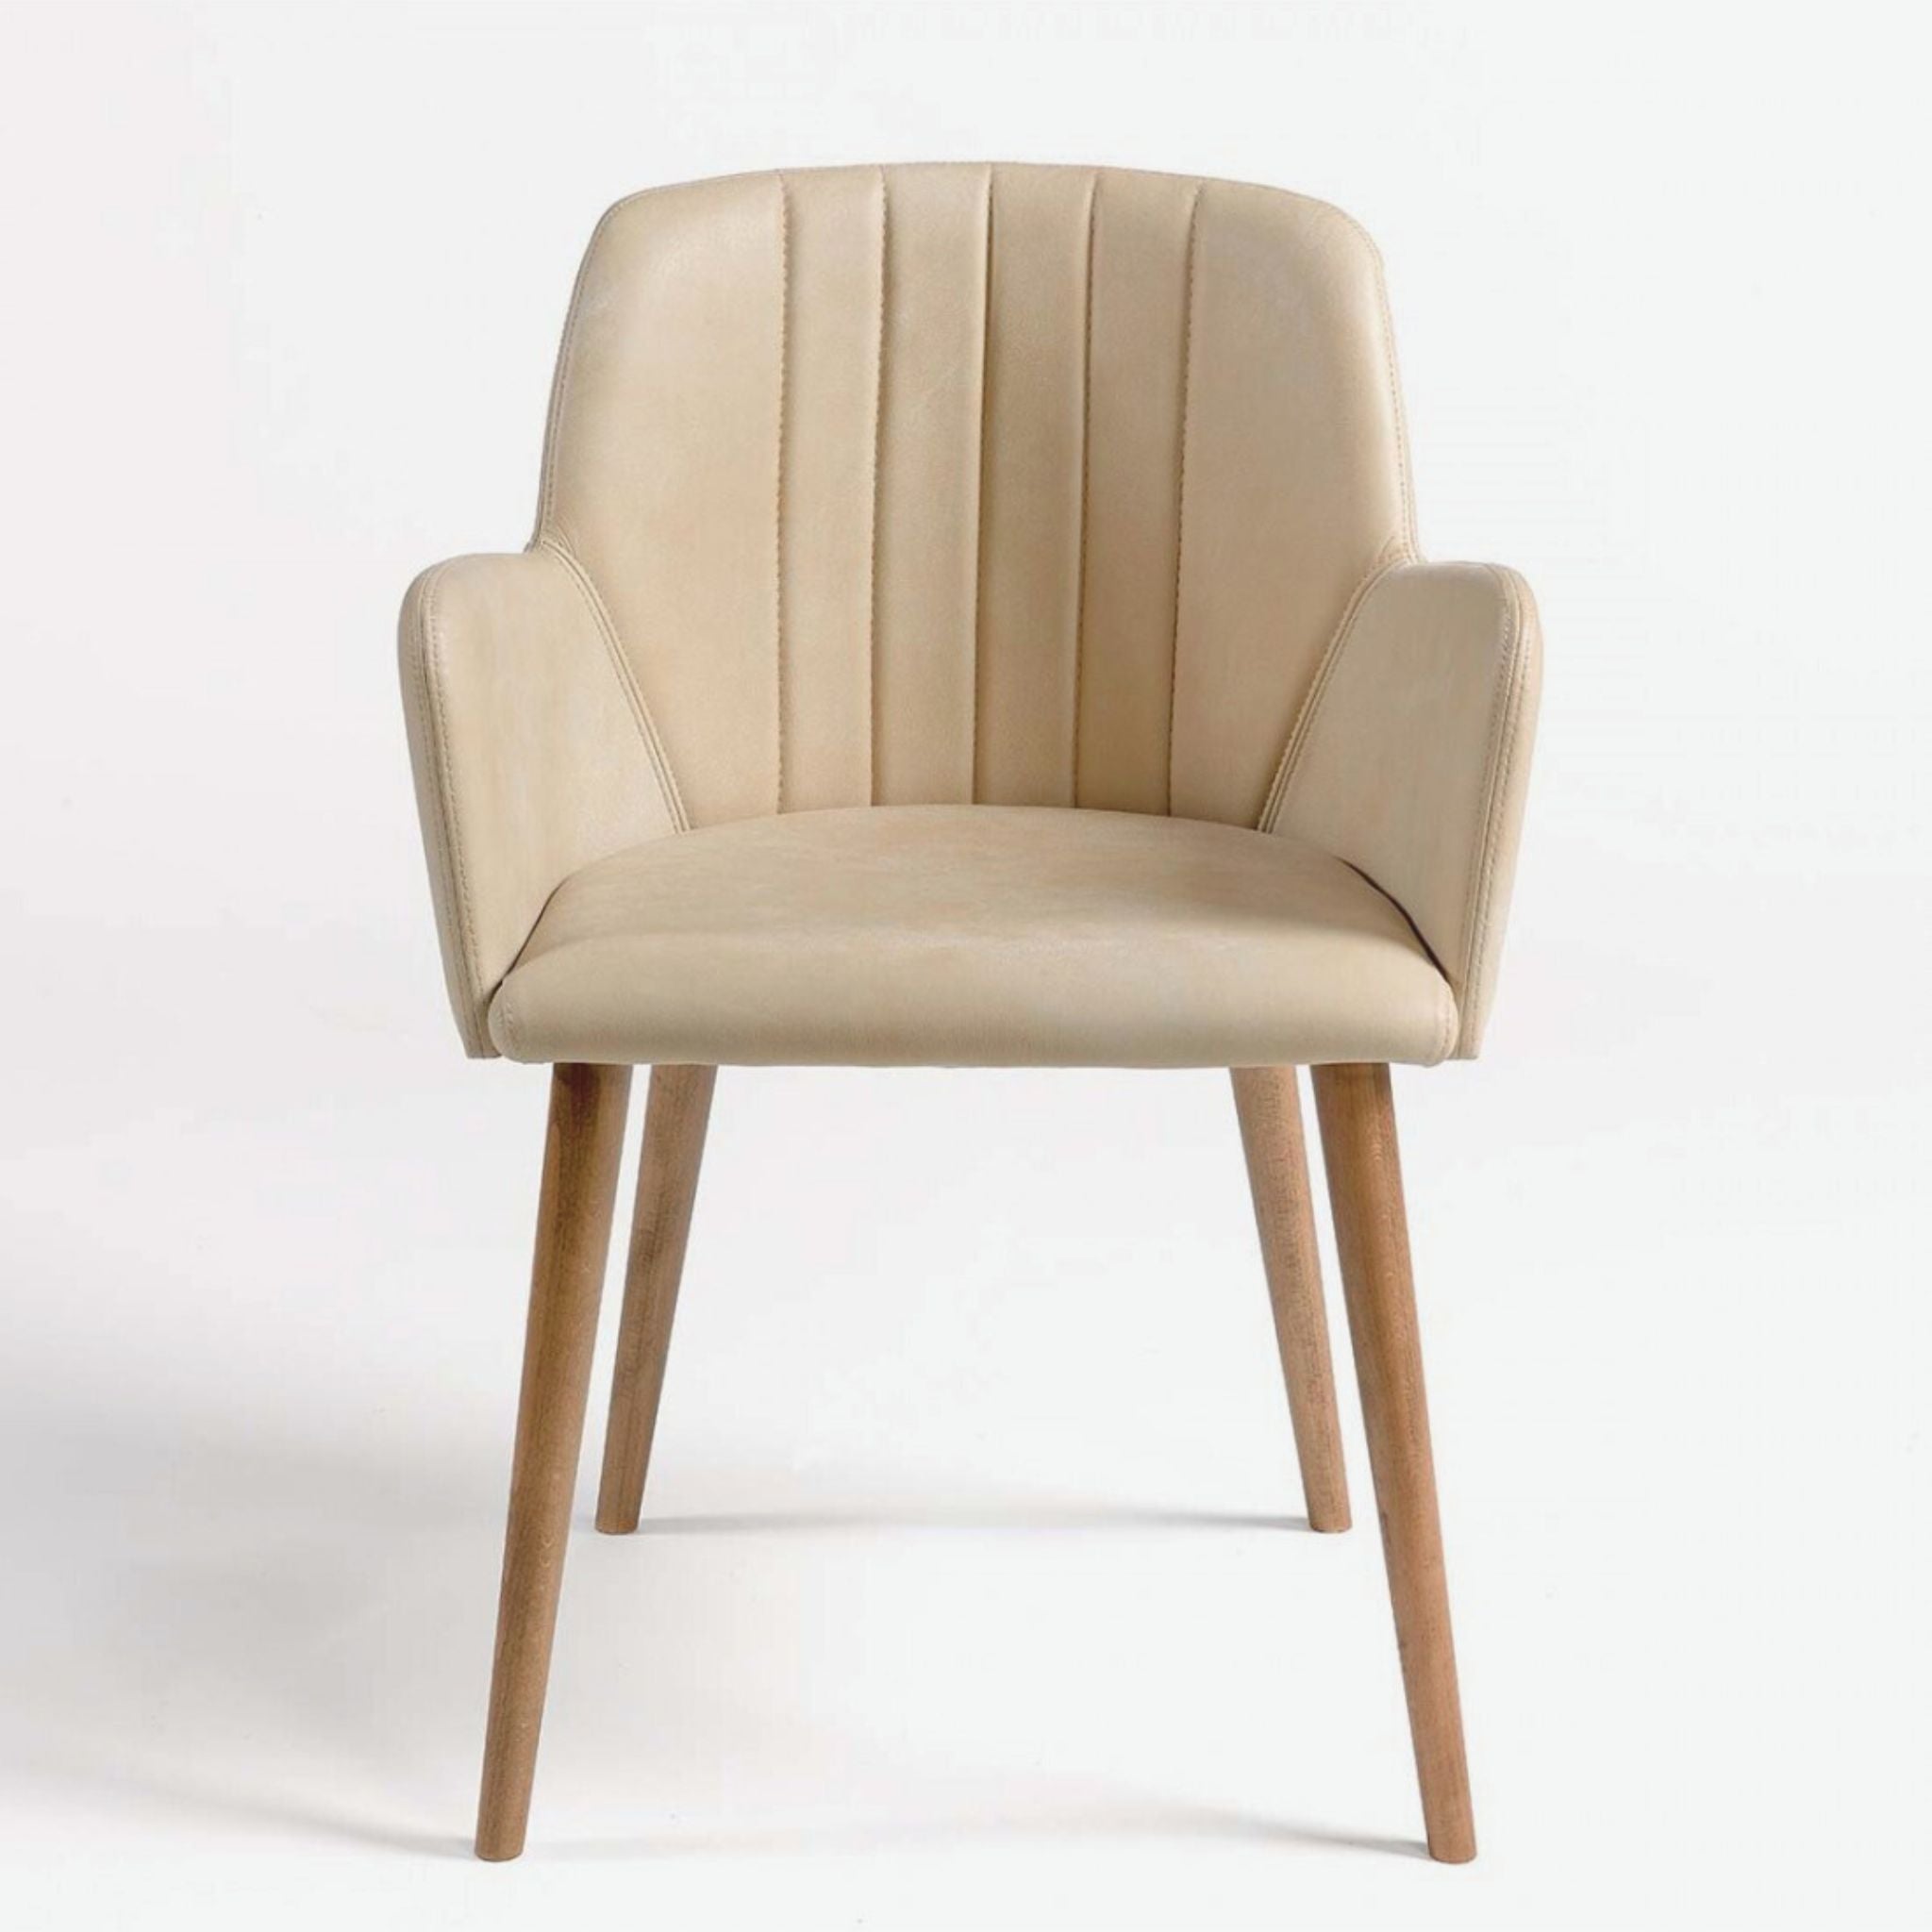 Crisal Decoracion Beige Leather Dining Chair with Wooden Legs - ModernistaLiving